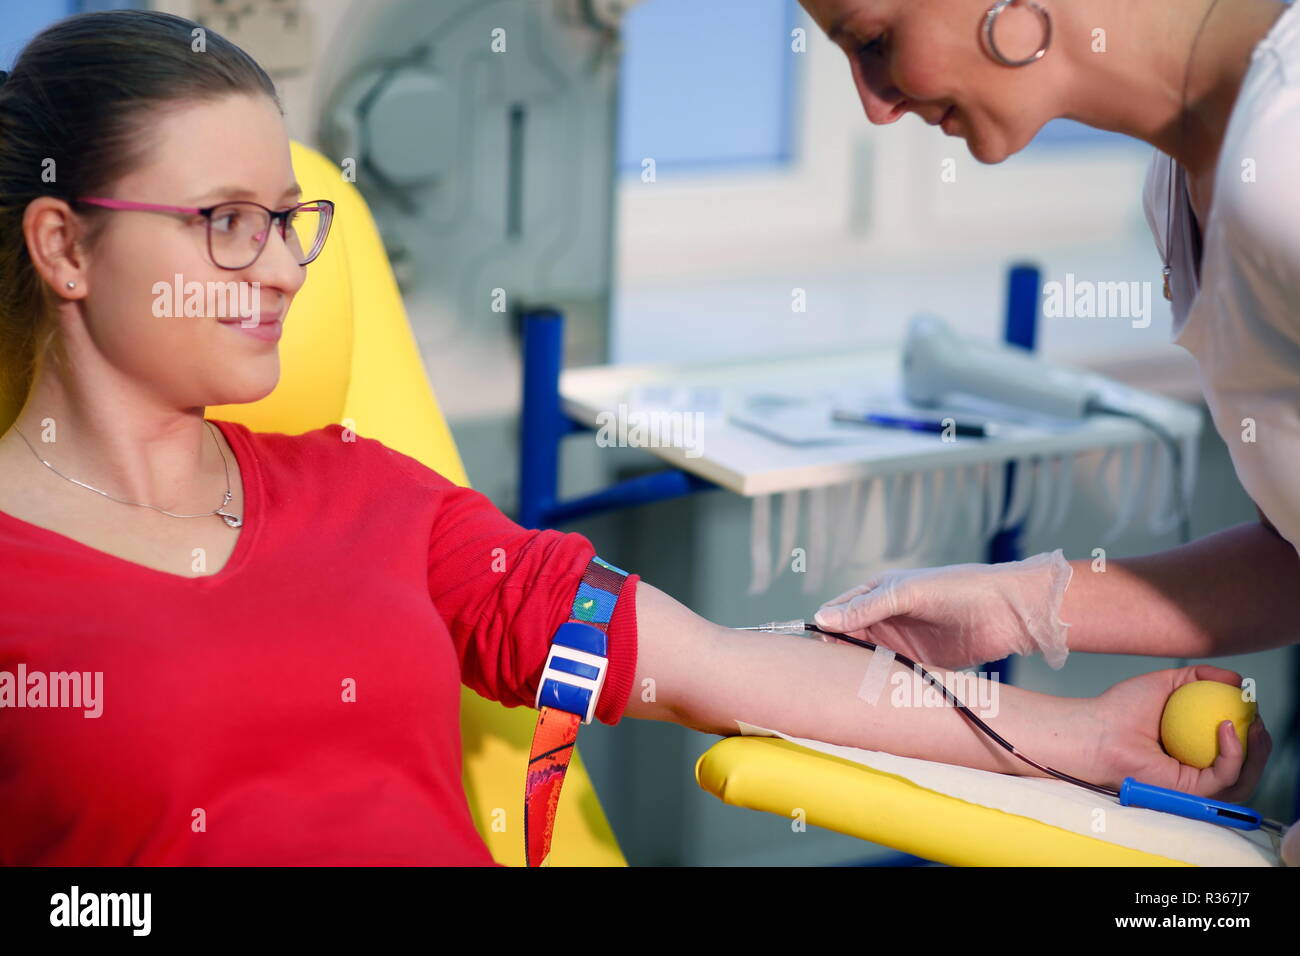 The nurse is taking blood from the patient at the hospital's  transfusion station. Stock Photo